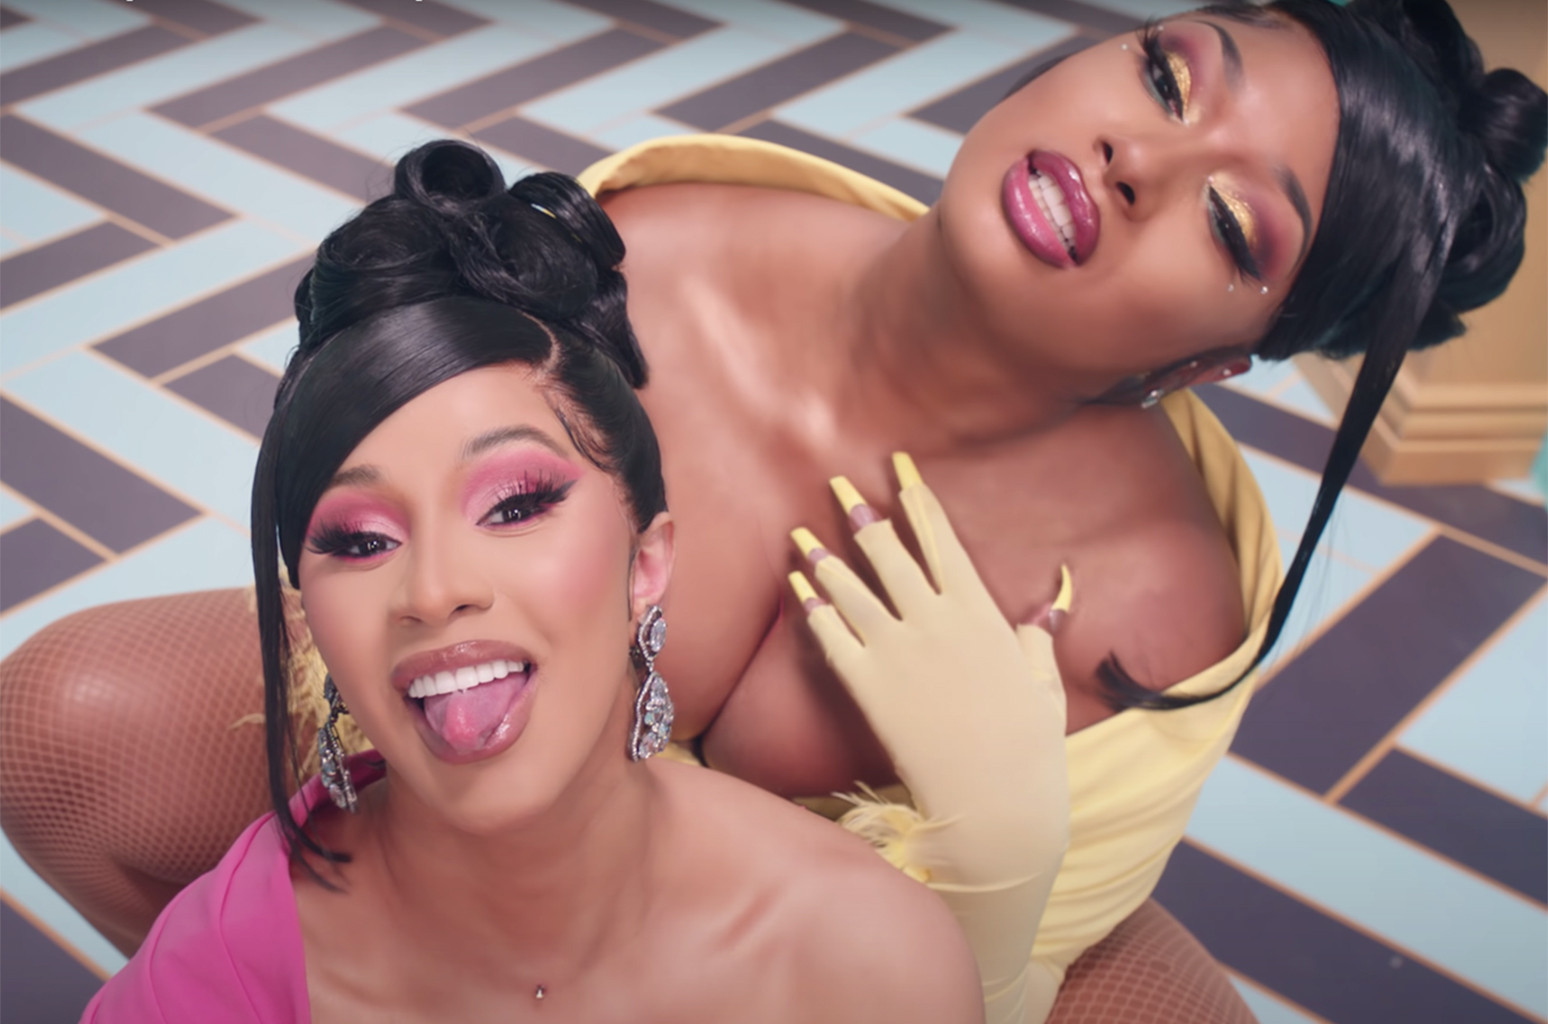 Cardi B & Megan Thee Stallion celebrate one year of ‘WAP’; contemplating another collabo